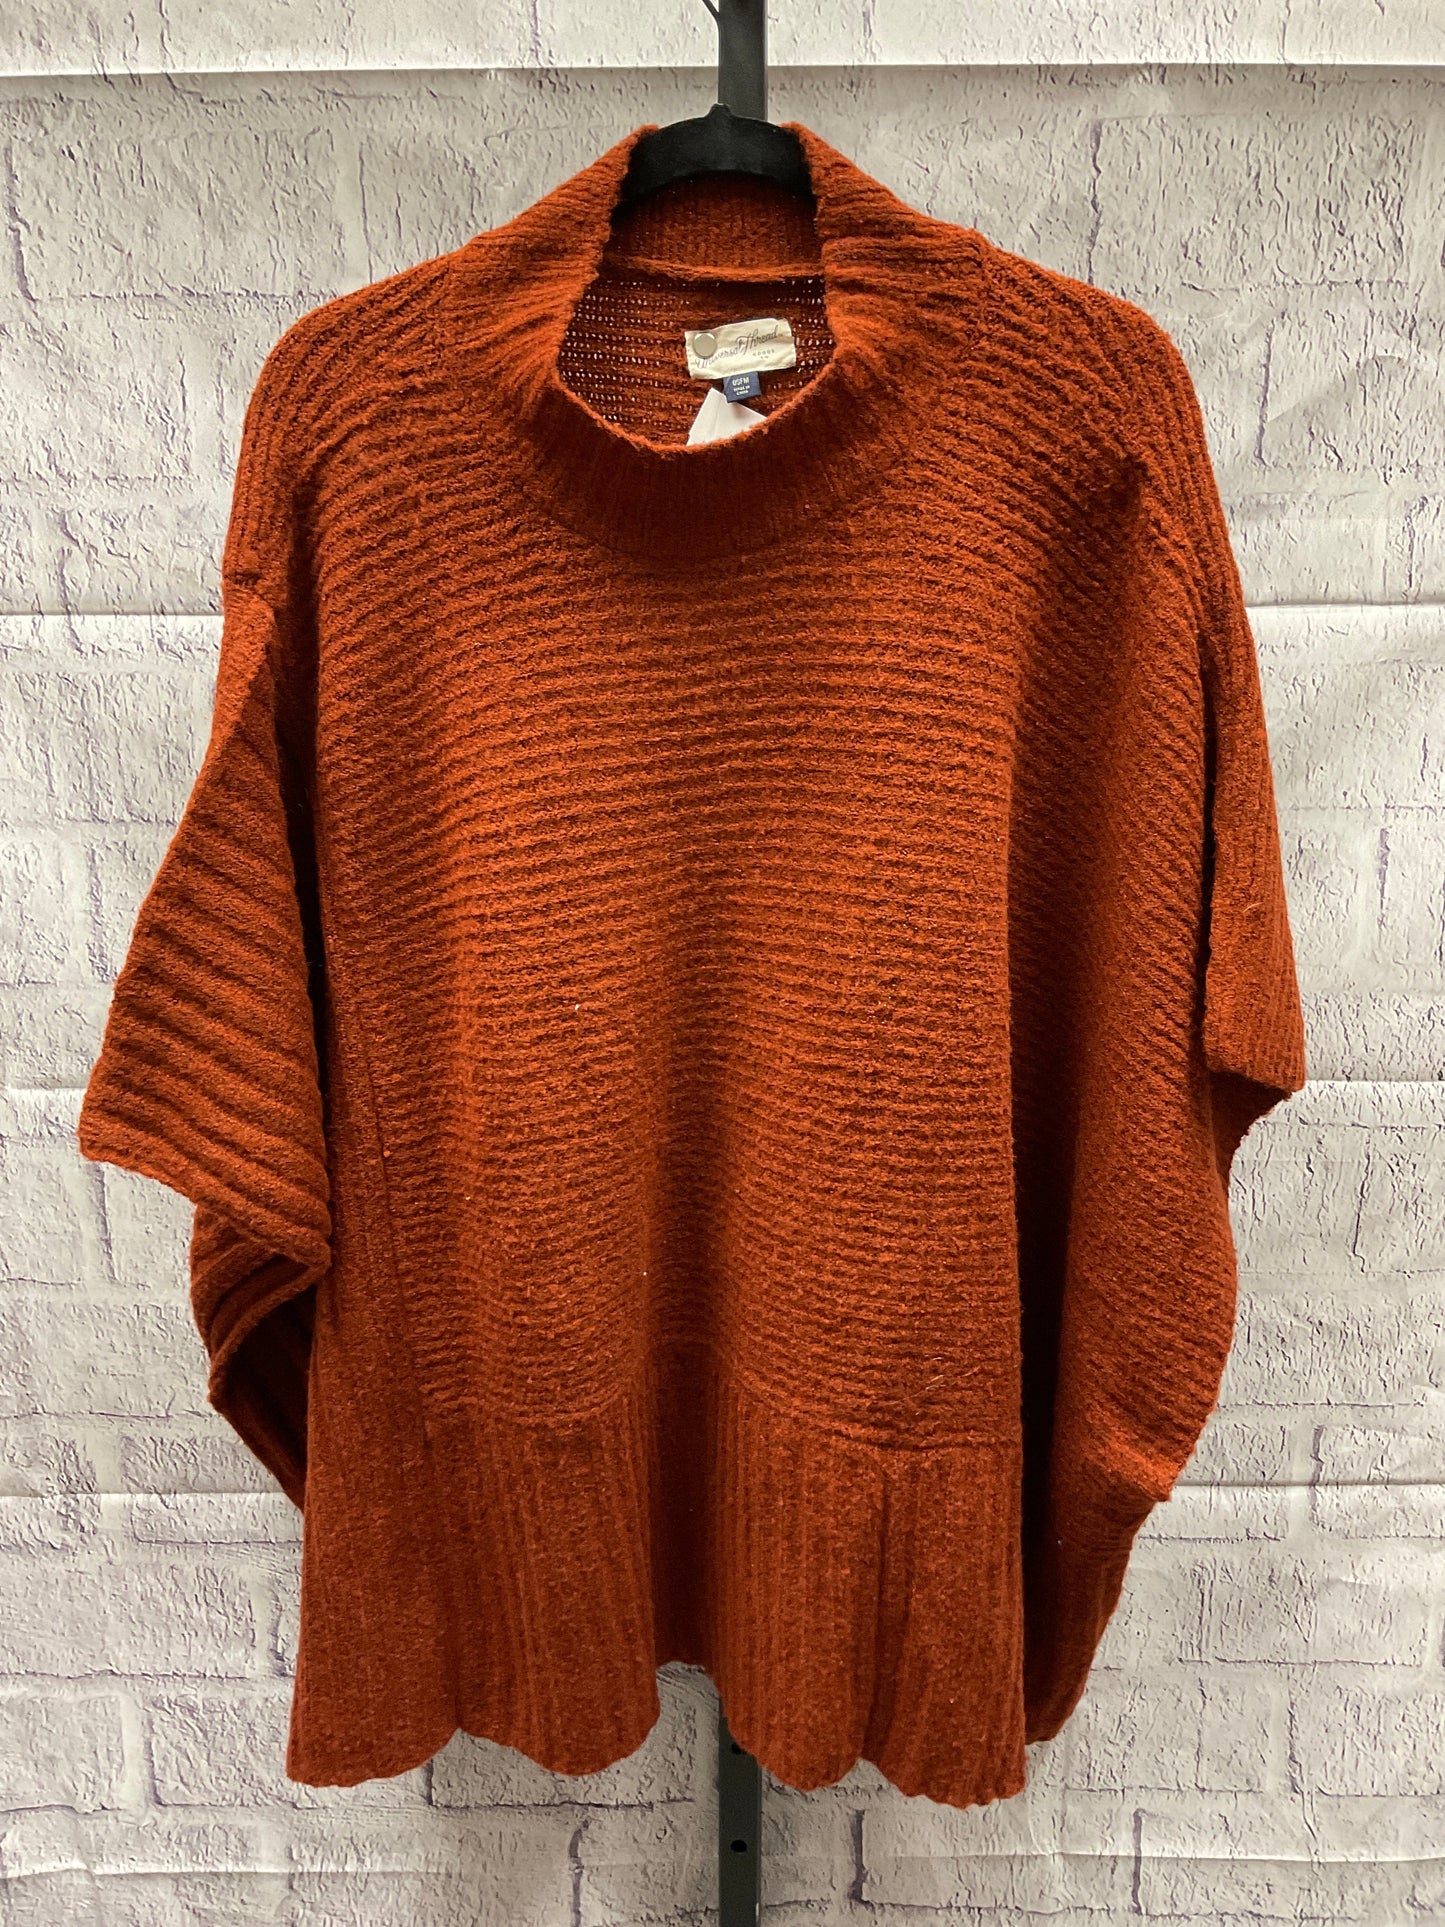 Sweater By Universal Thread  Size: Osfm